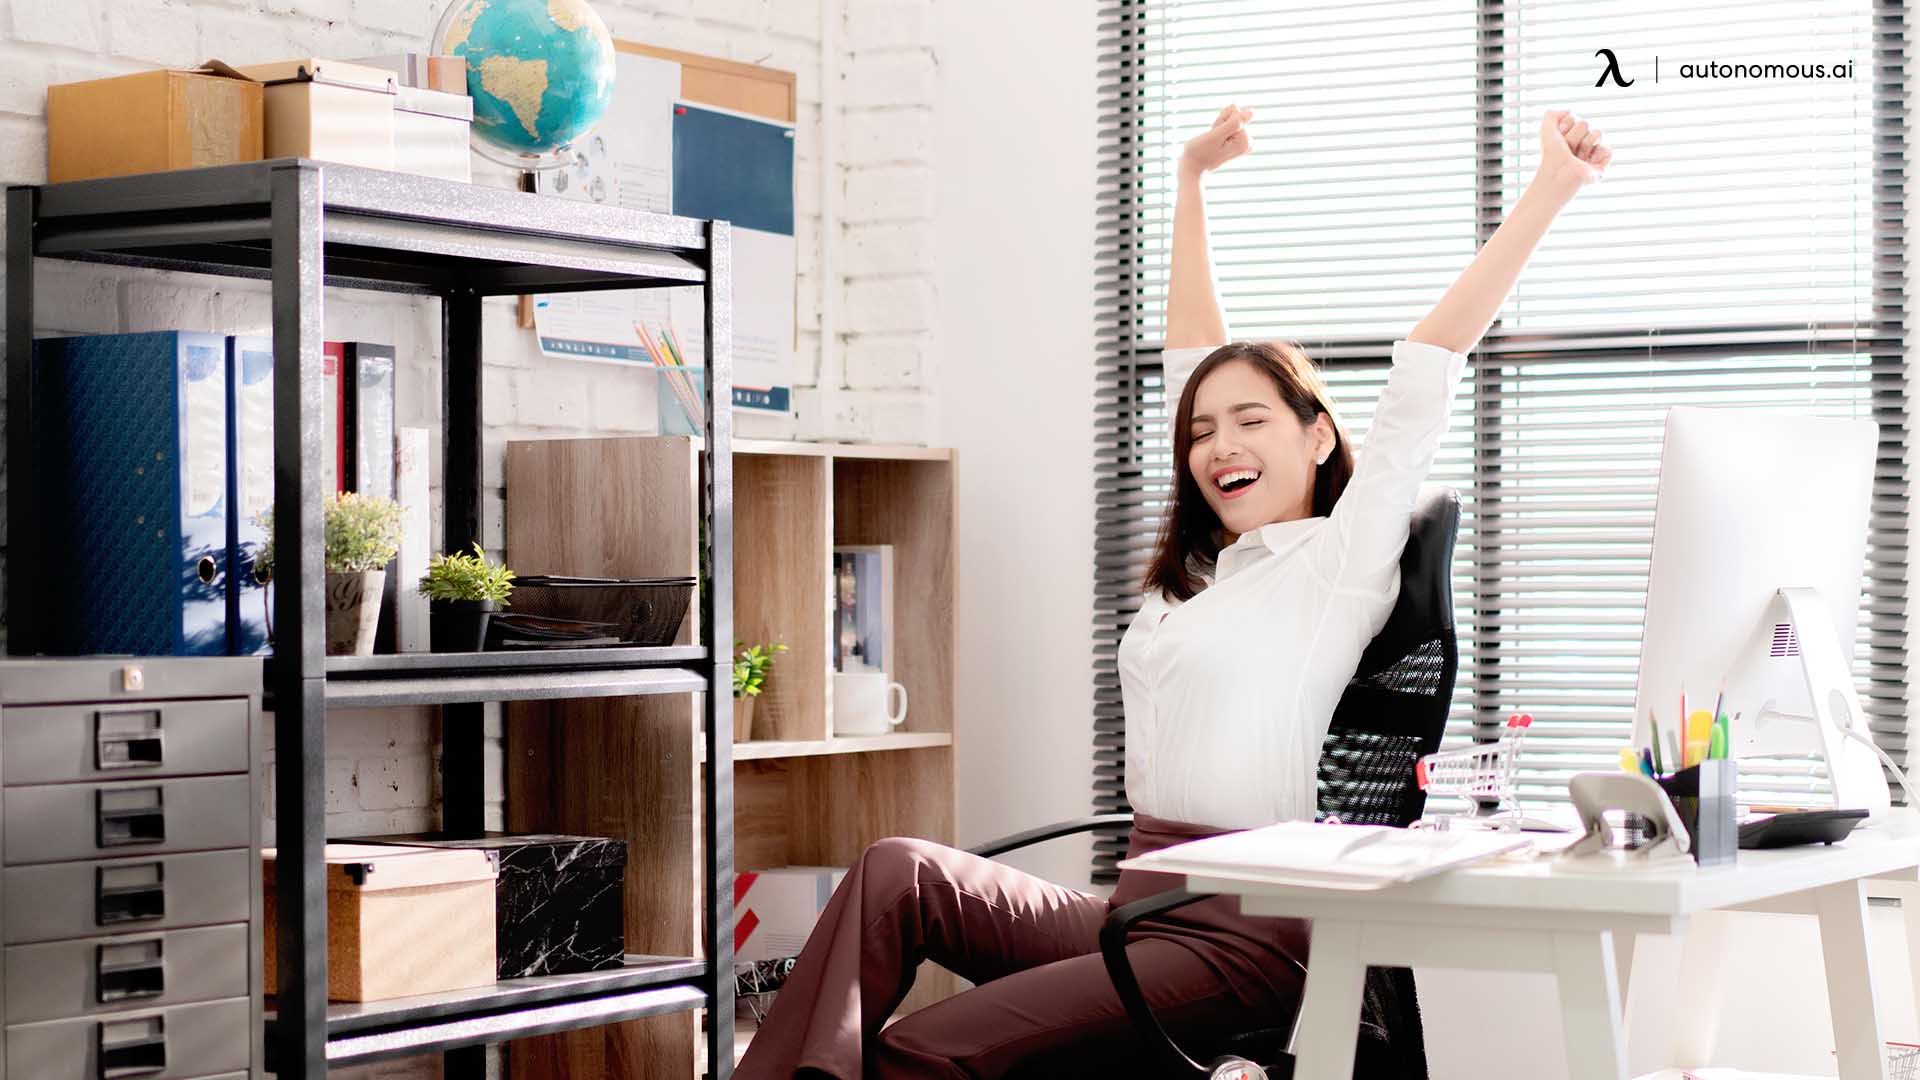 The Importance of Stress-Free Work Environment